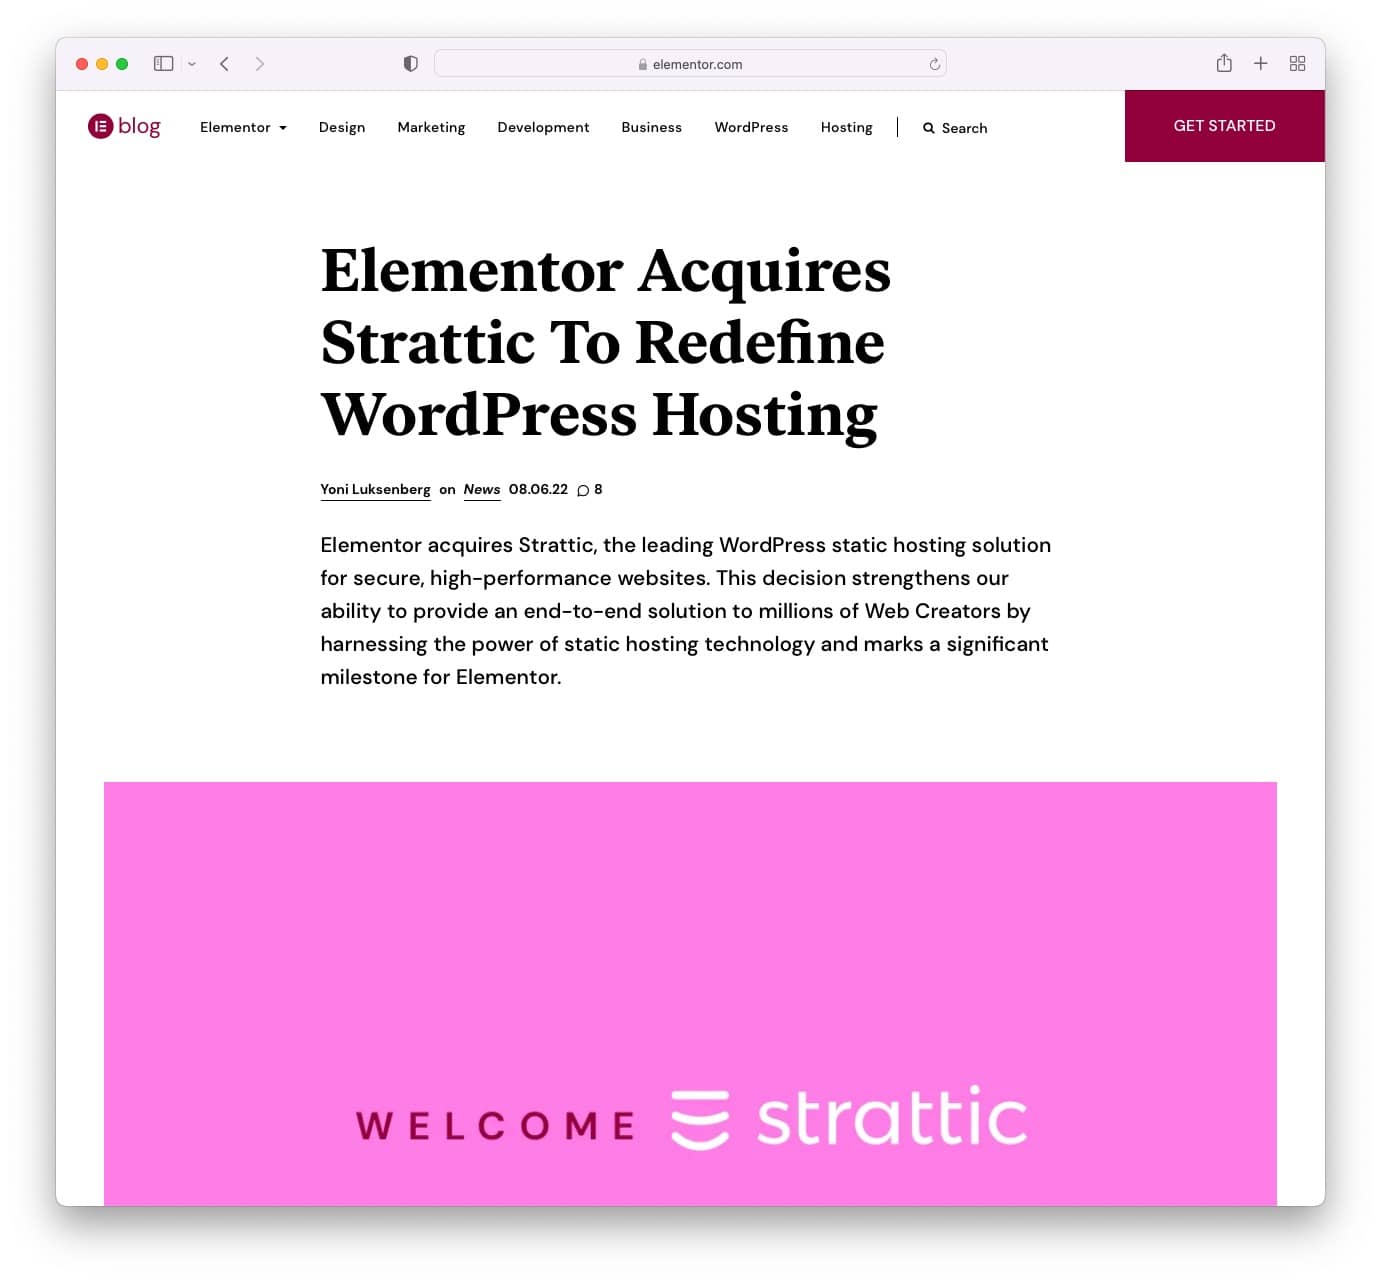 Elementor acquires Strattic, a static WordPress hosting service